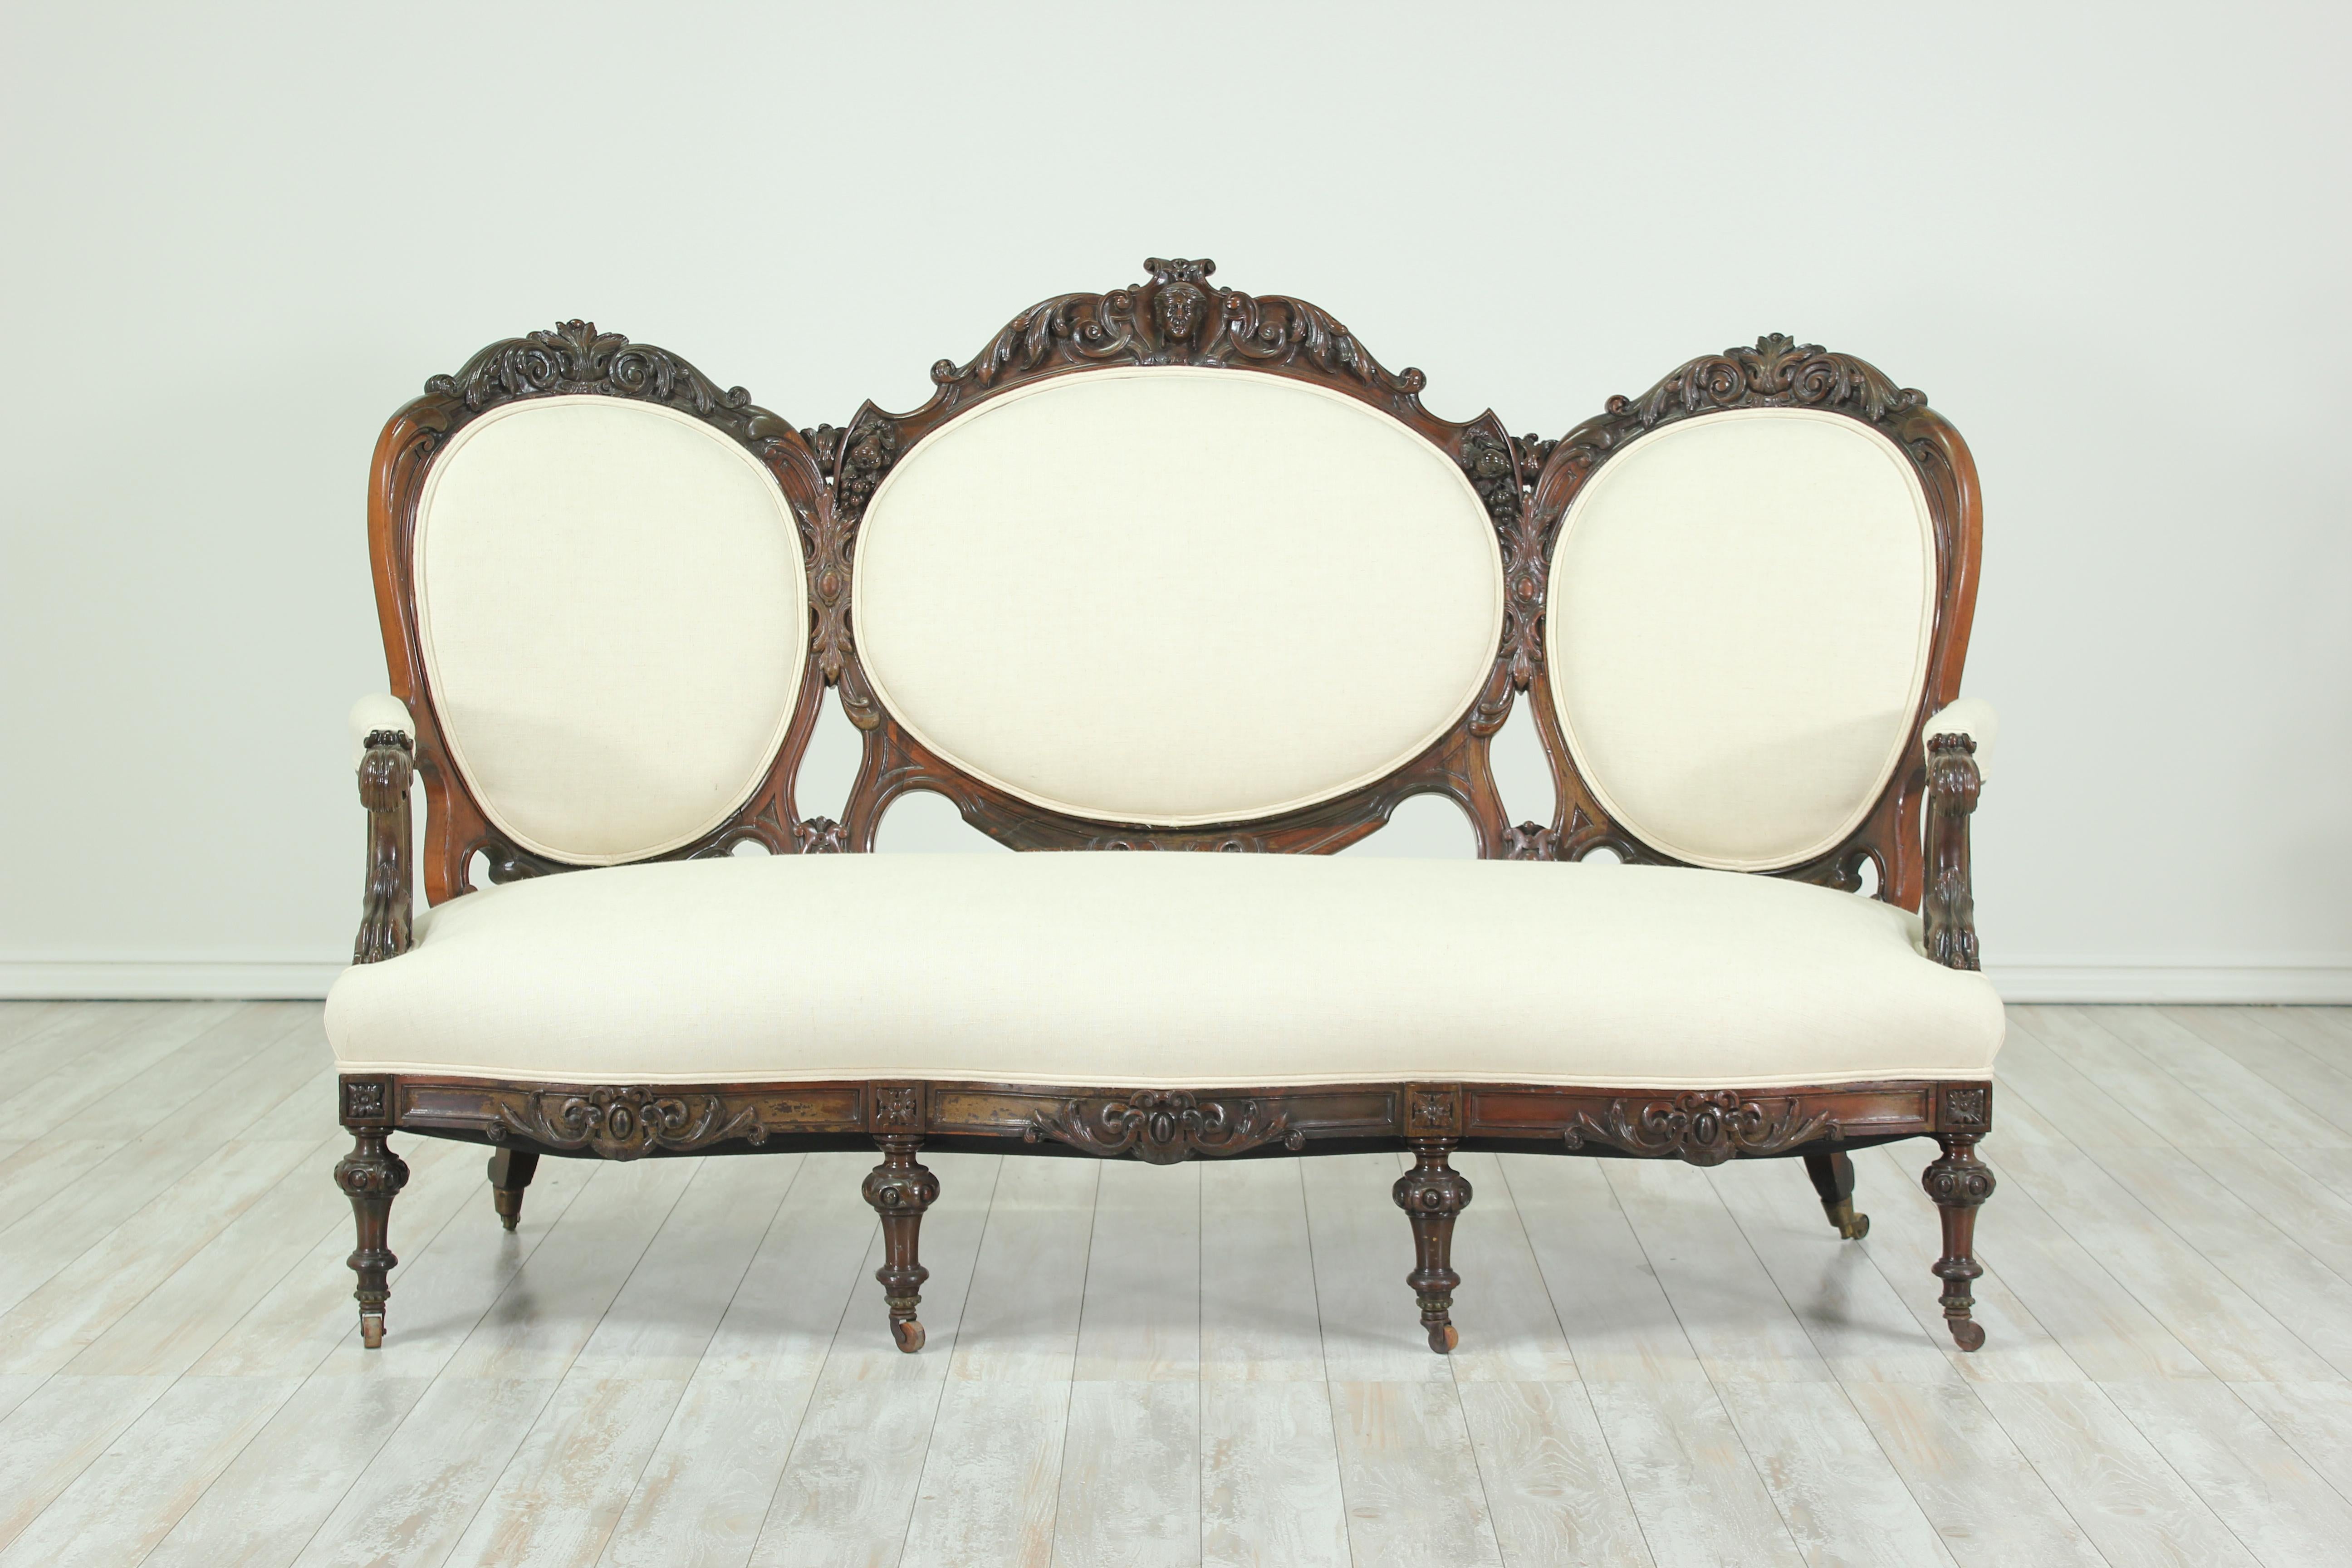 Beautifully carved and shapely mahogany 1930s Victorian-style sofa. Newly upholstered in a quality linen textile.. The sofa is sturdy and ready for years of use and enjoyment.